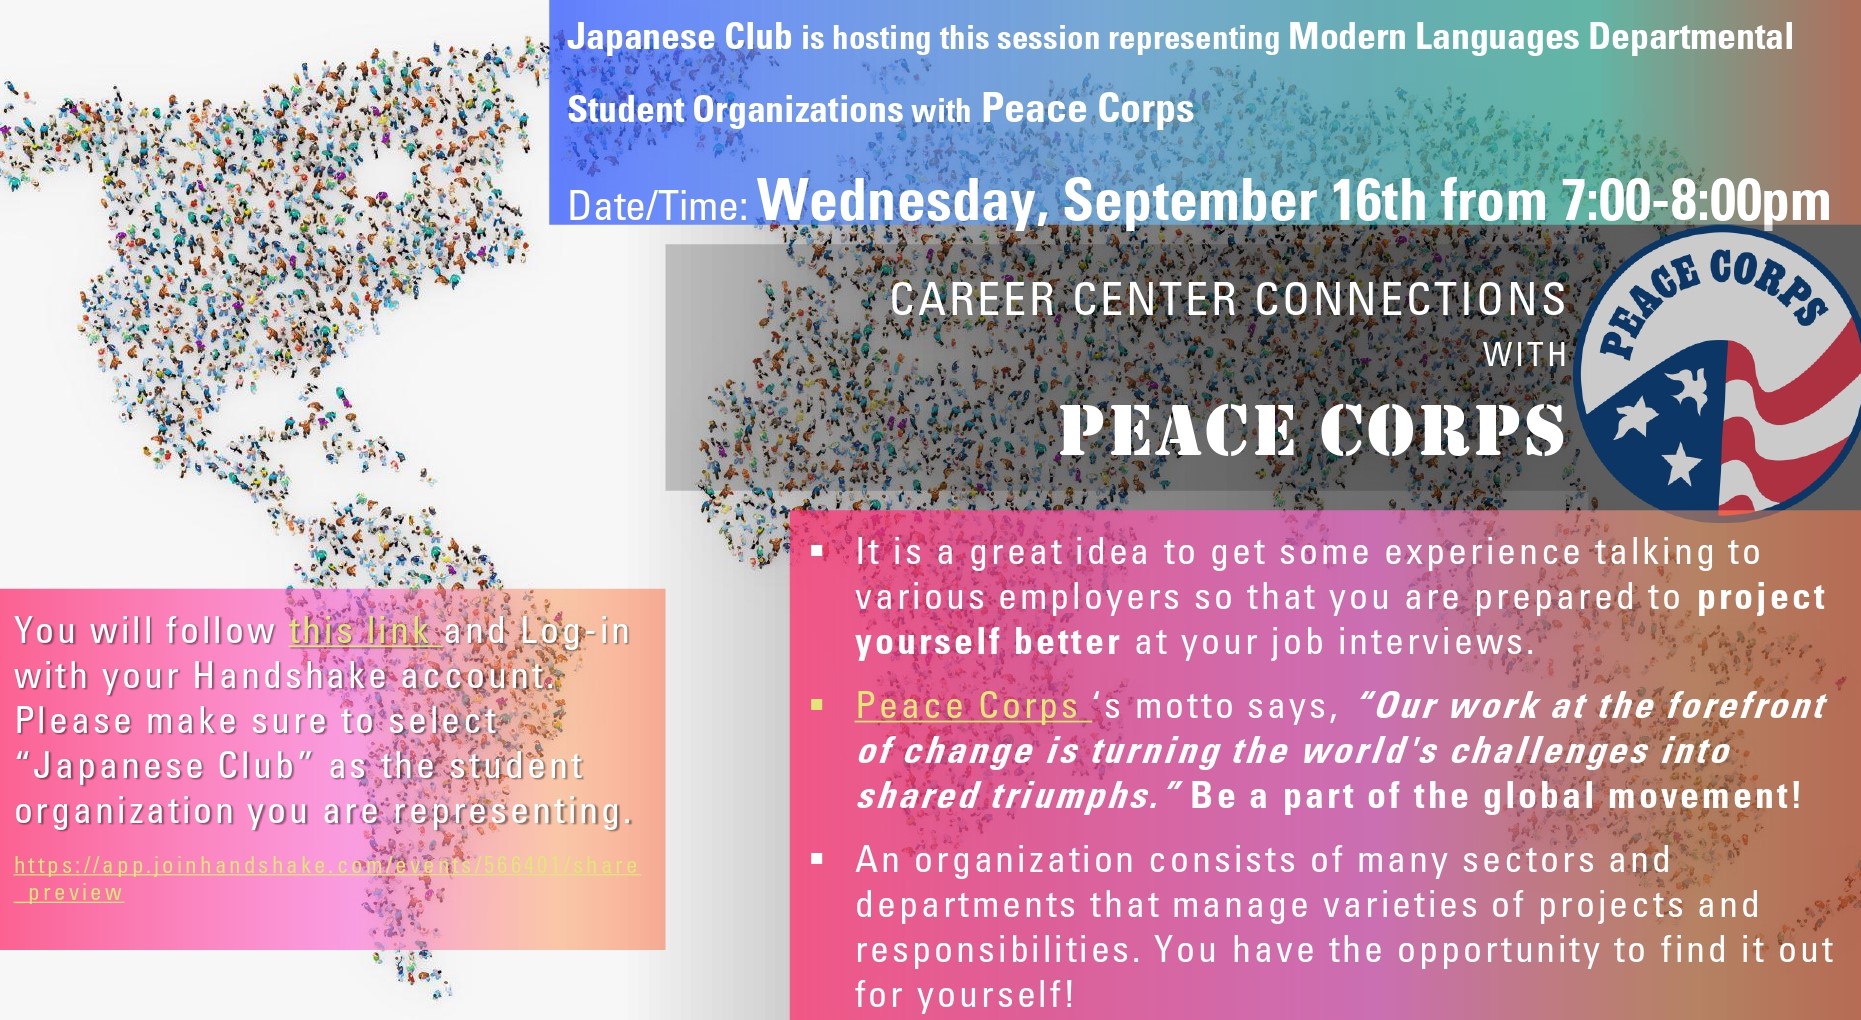 Career Connections with Peace Corps Event flyer